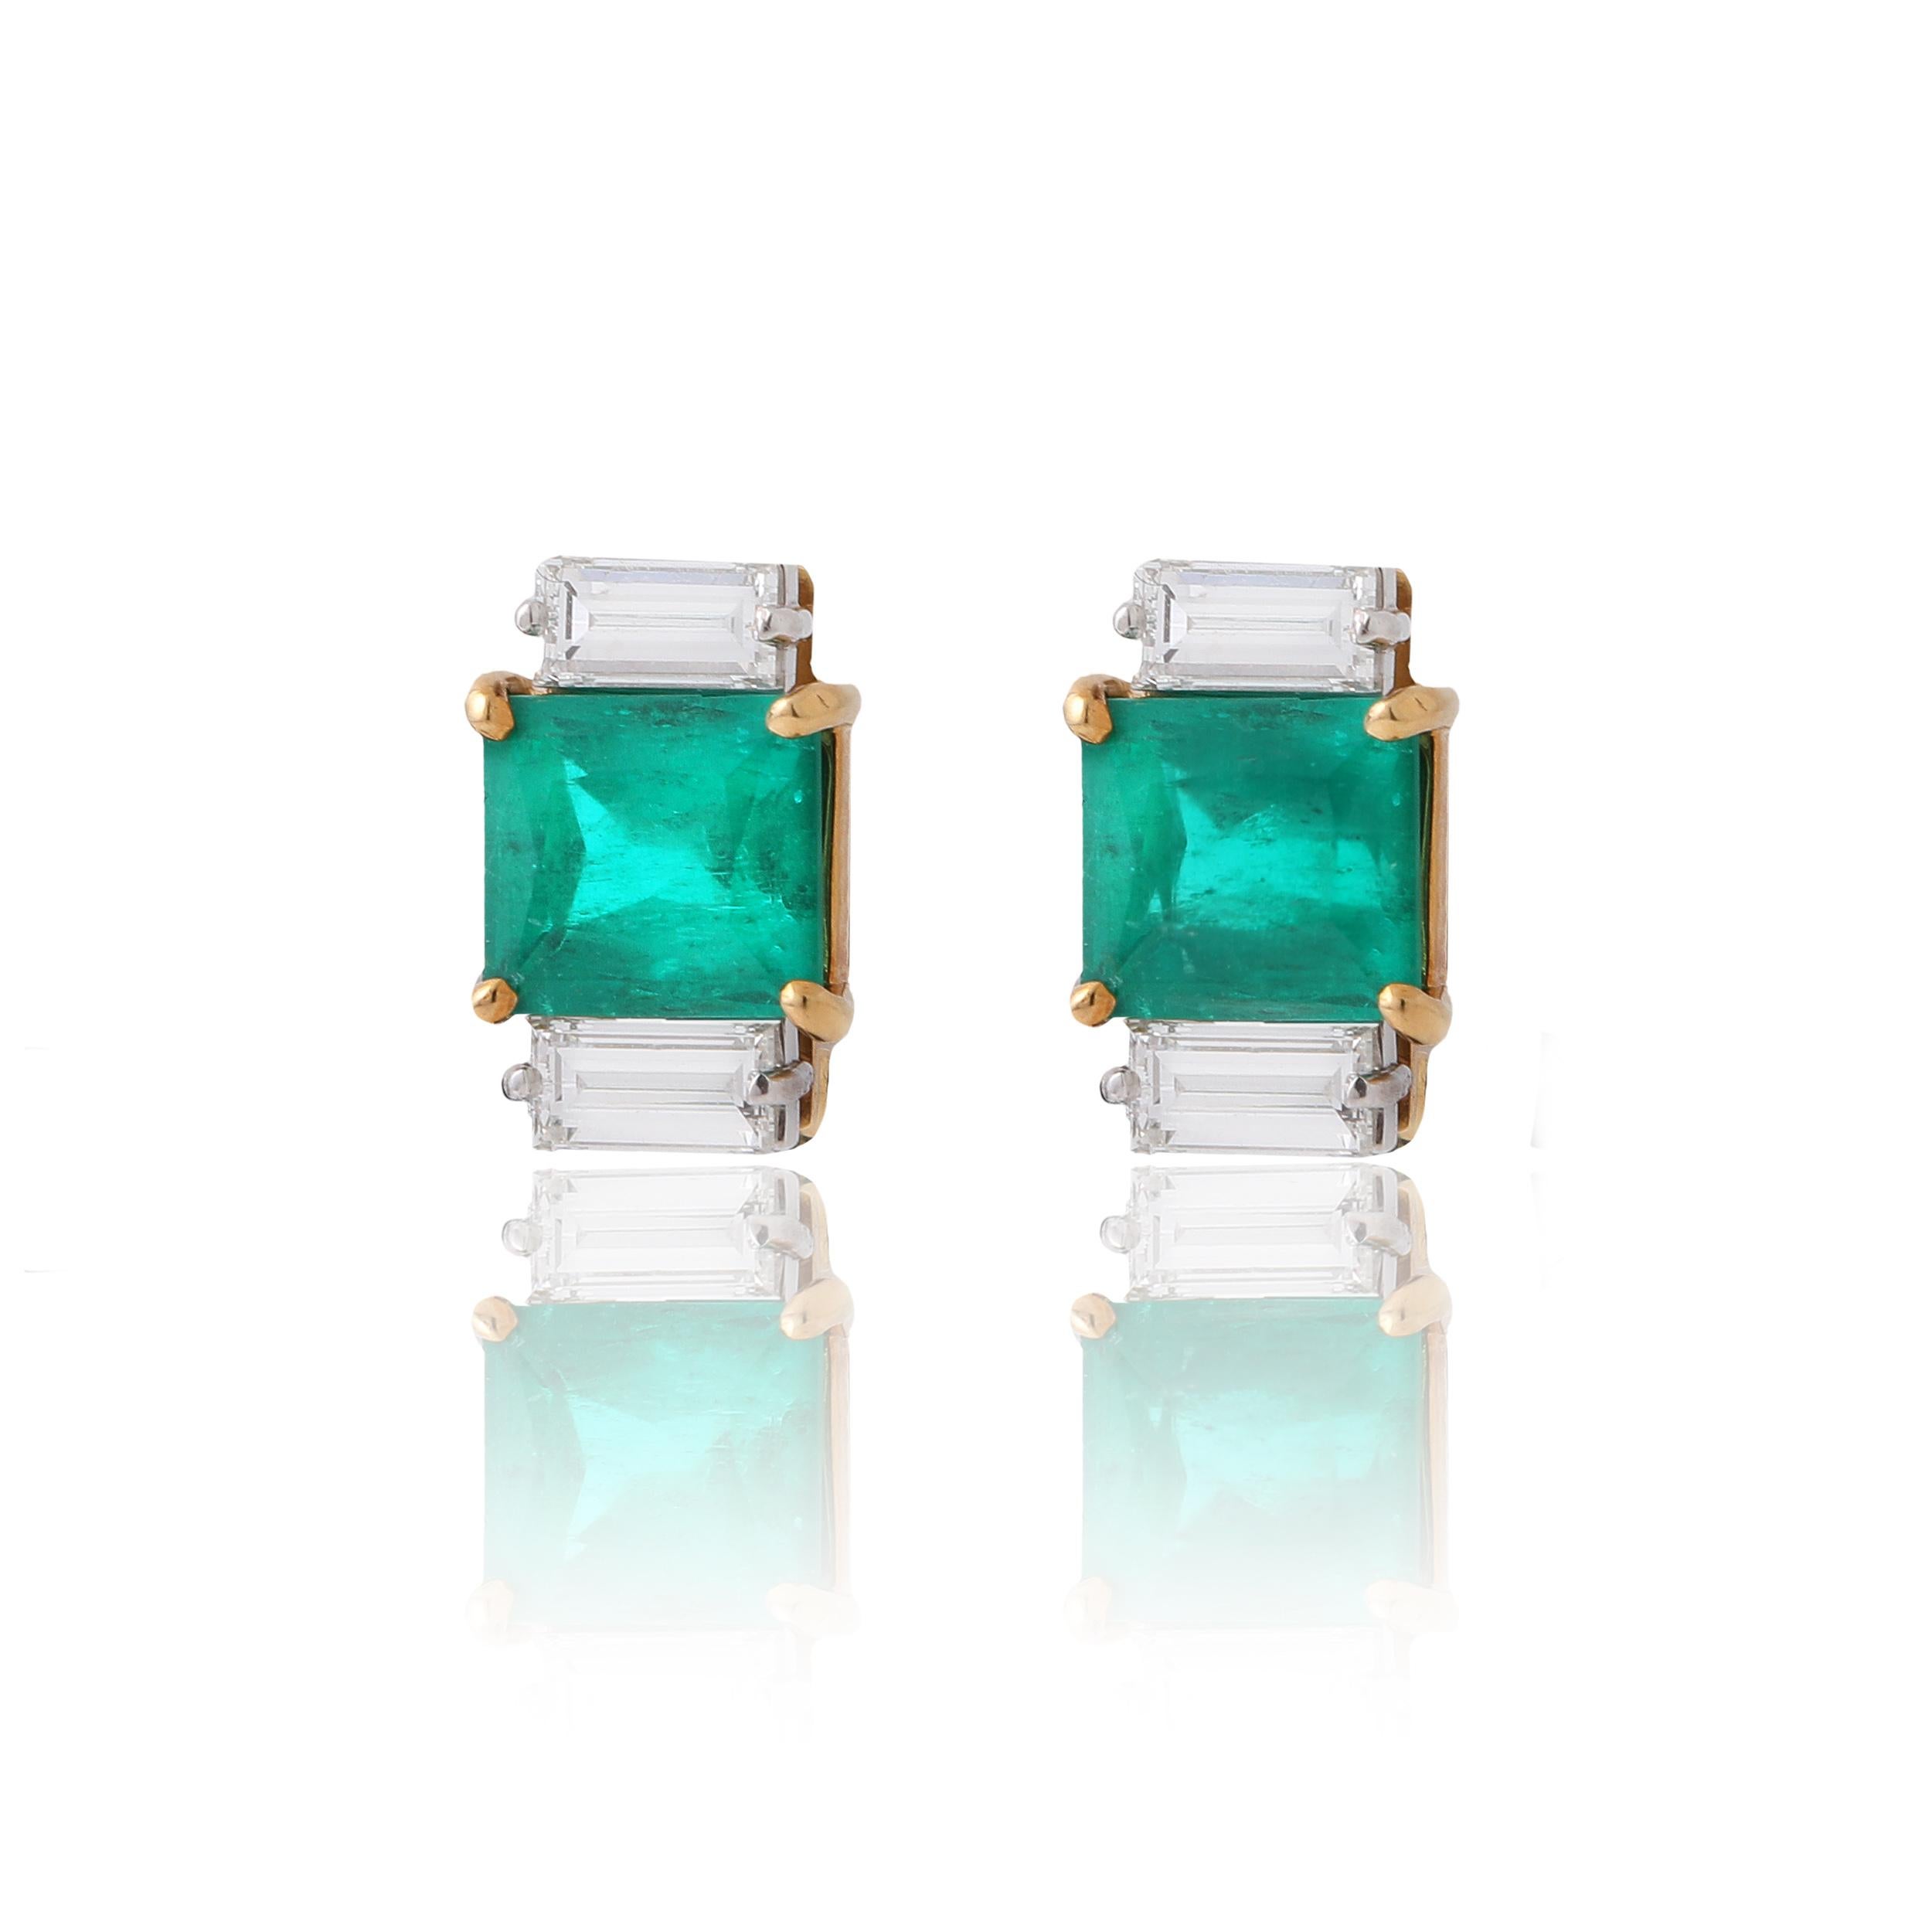 A pair of beautiful custom crafted 18k & platinum diamond & emerald earrings. Earrings consist of 2 gorgeous emerald cut Columbian emeralds weighing 5.20 cts framed by straight baguette emerald cut F VS1 diamonds weighing 1.42cts

Weight: 9.1